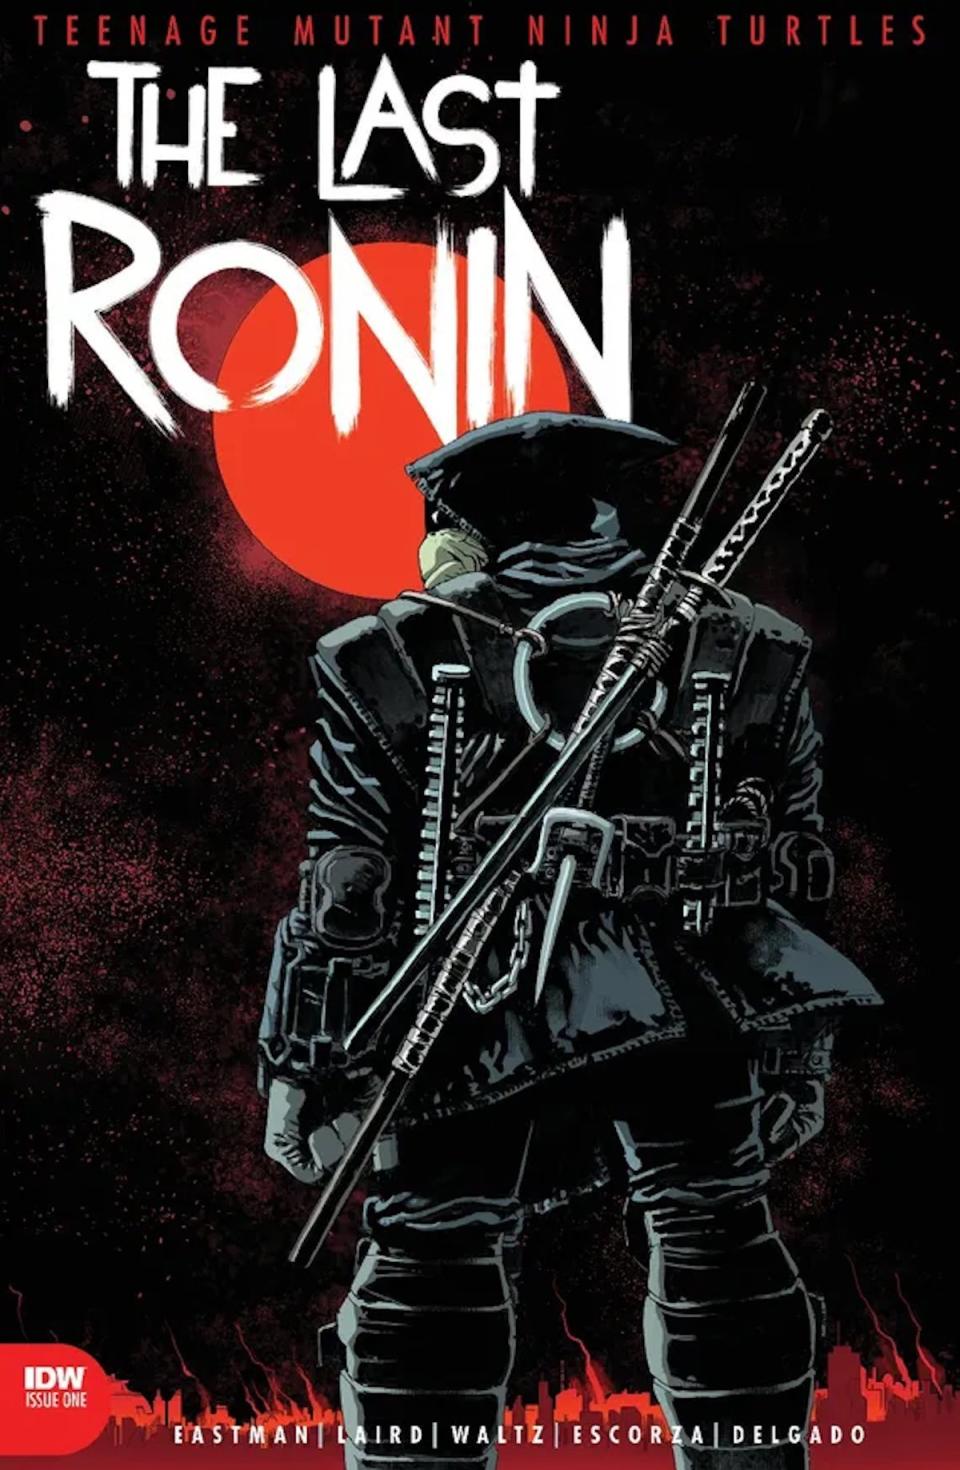 The cover of TMNT: The Last Ronin from IDW Publishing, fetauring an unseen Ninja Turtle with many weapons on their back against a black background with a red sun